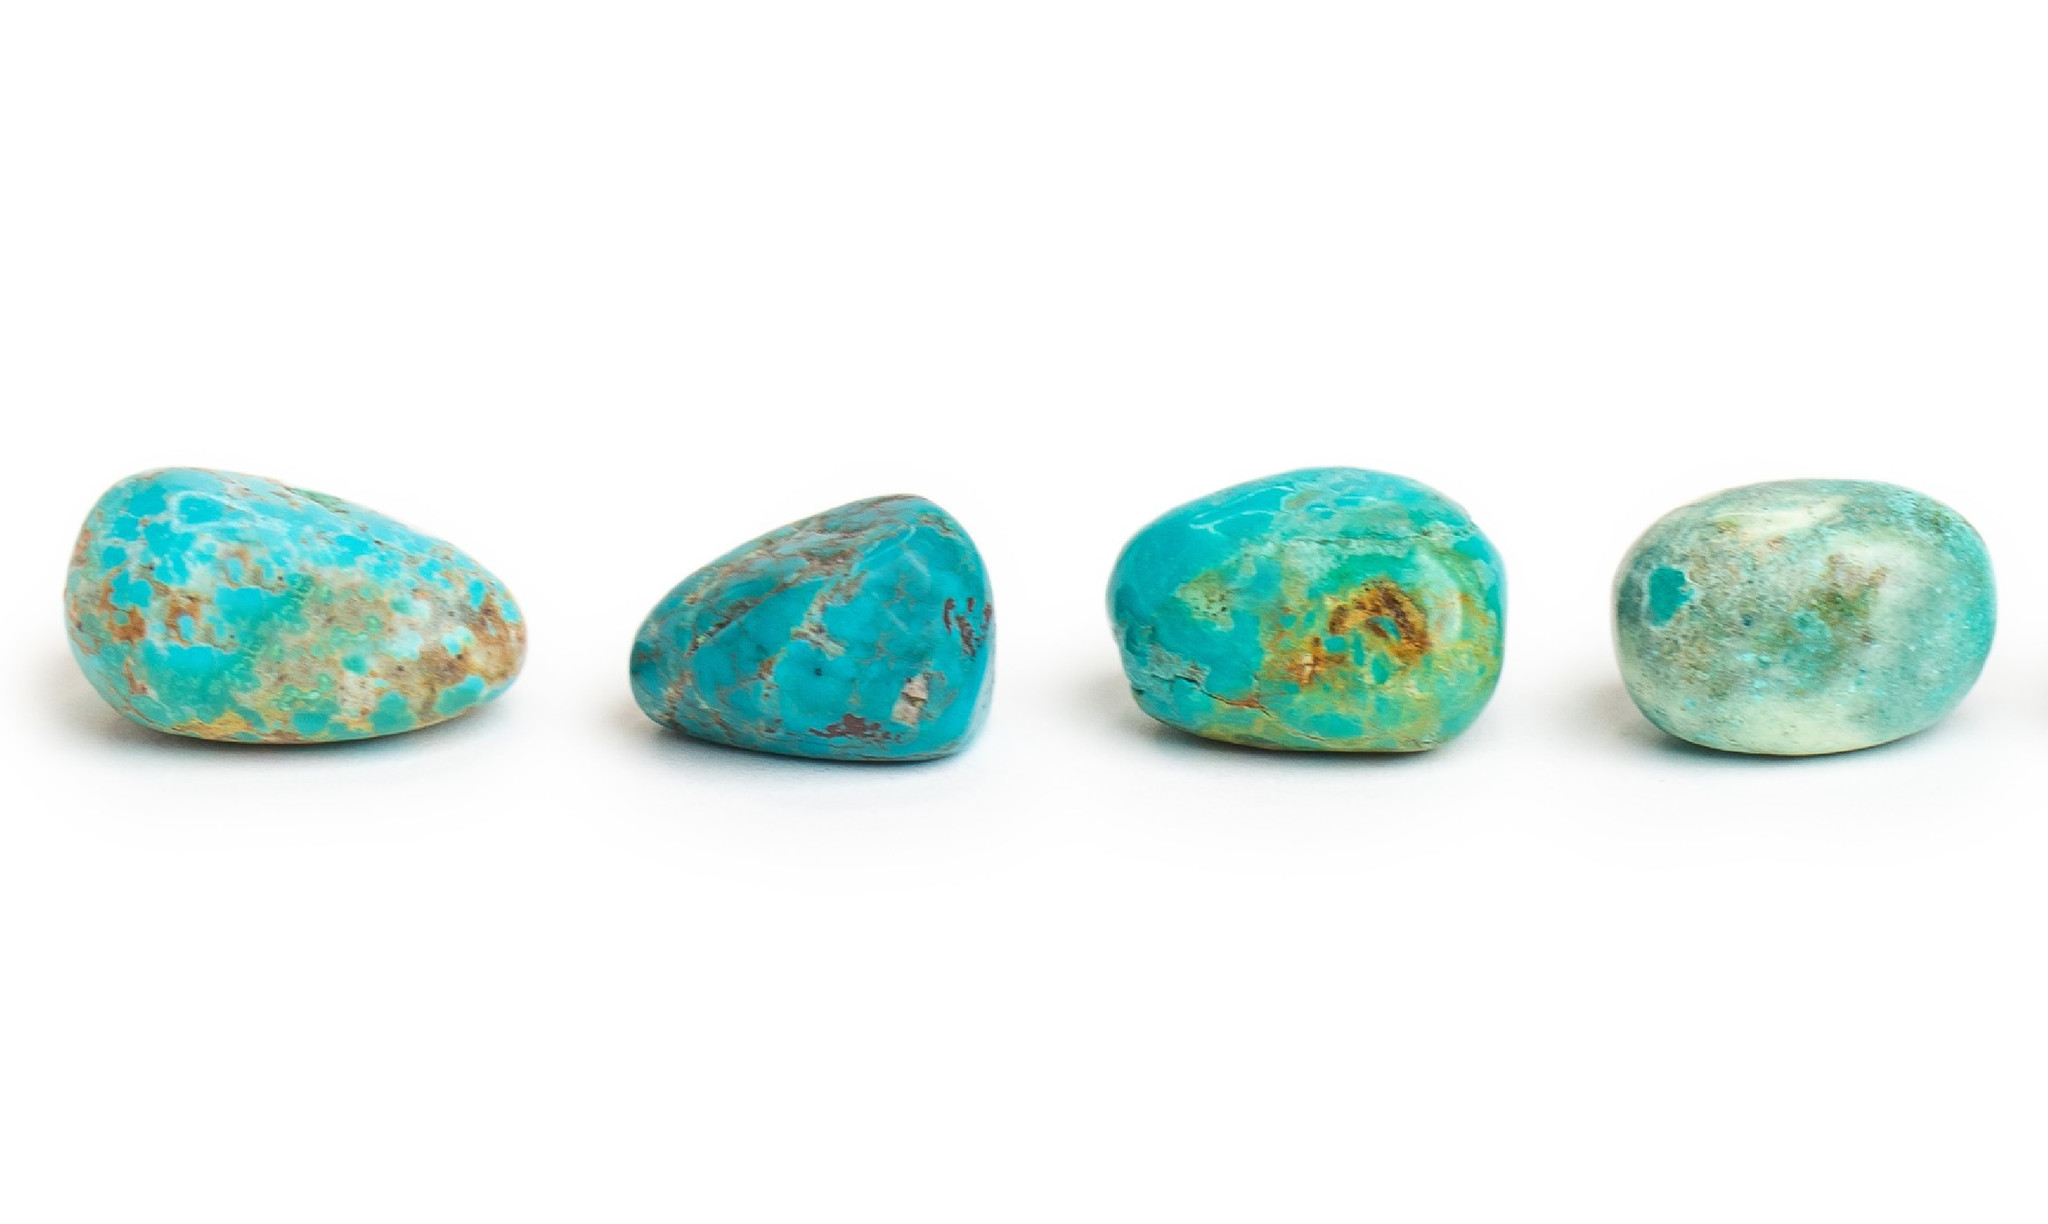 Four pieces of tumbled bright blue turquoise. All 4 are smaller pieces with brown and yellow inclusions